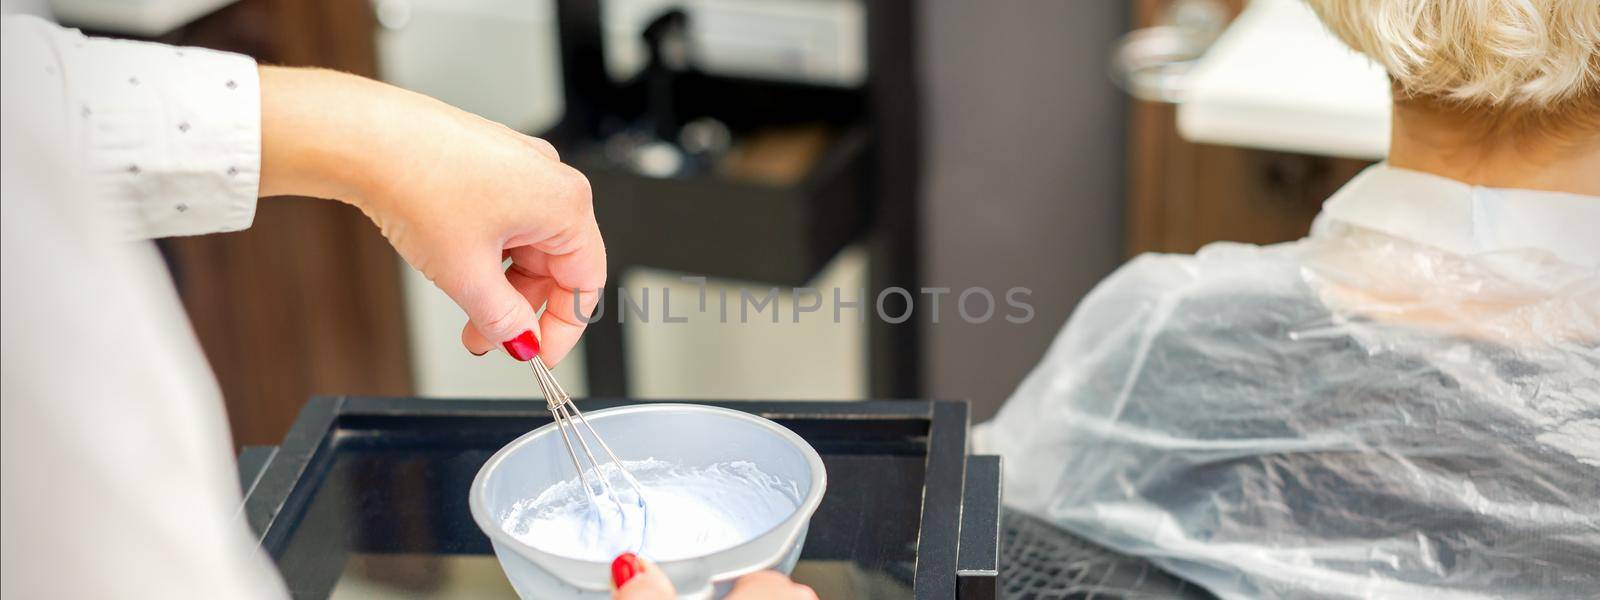 The hairstylist makes a white color dye mix for coloring hair at a salon close-up.